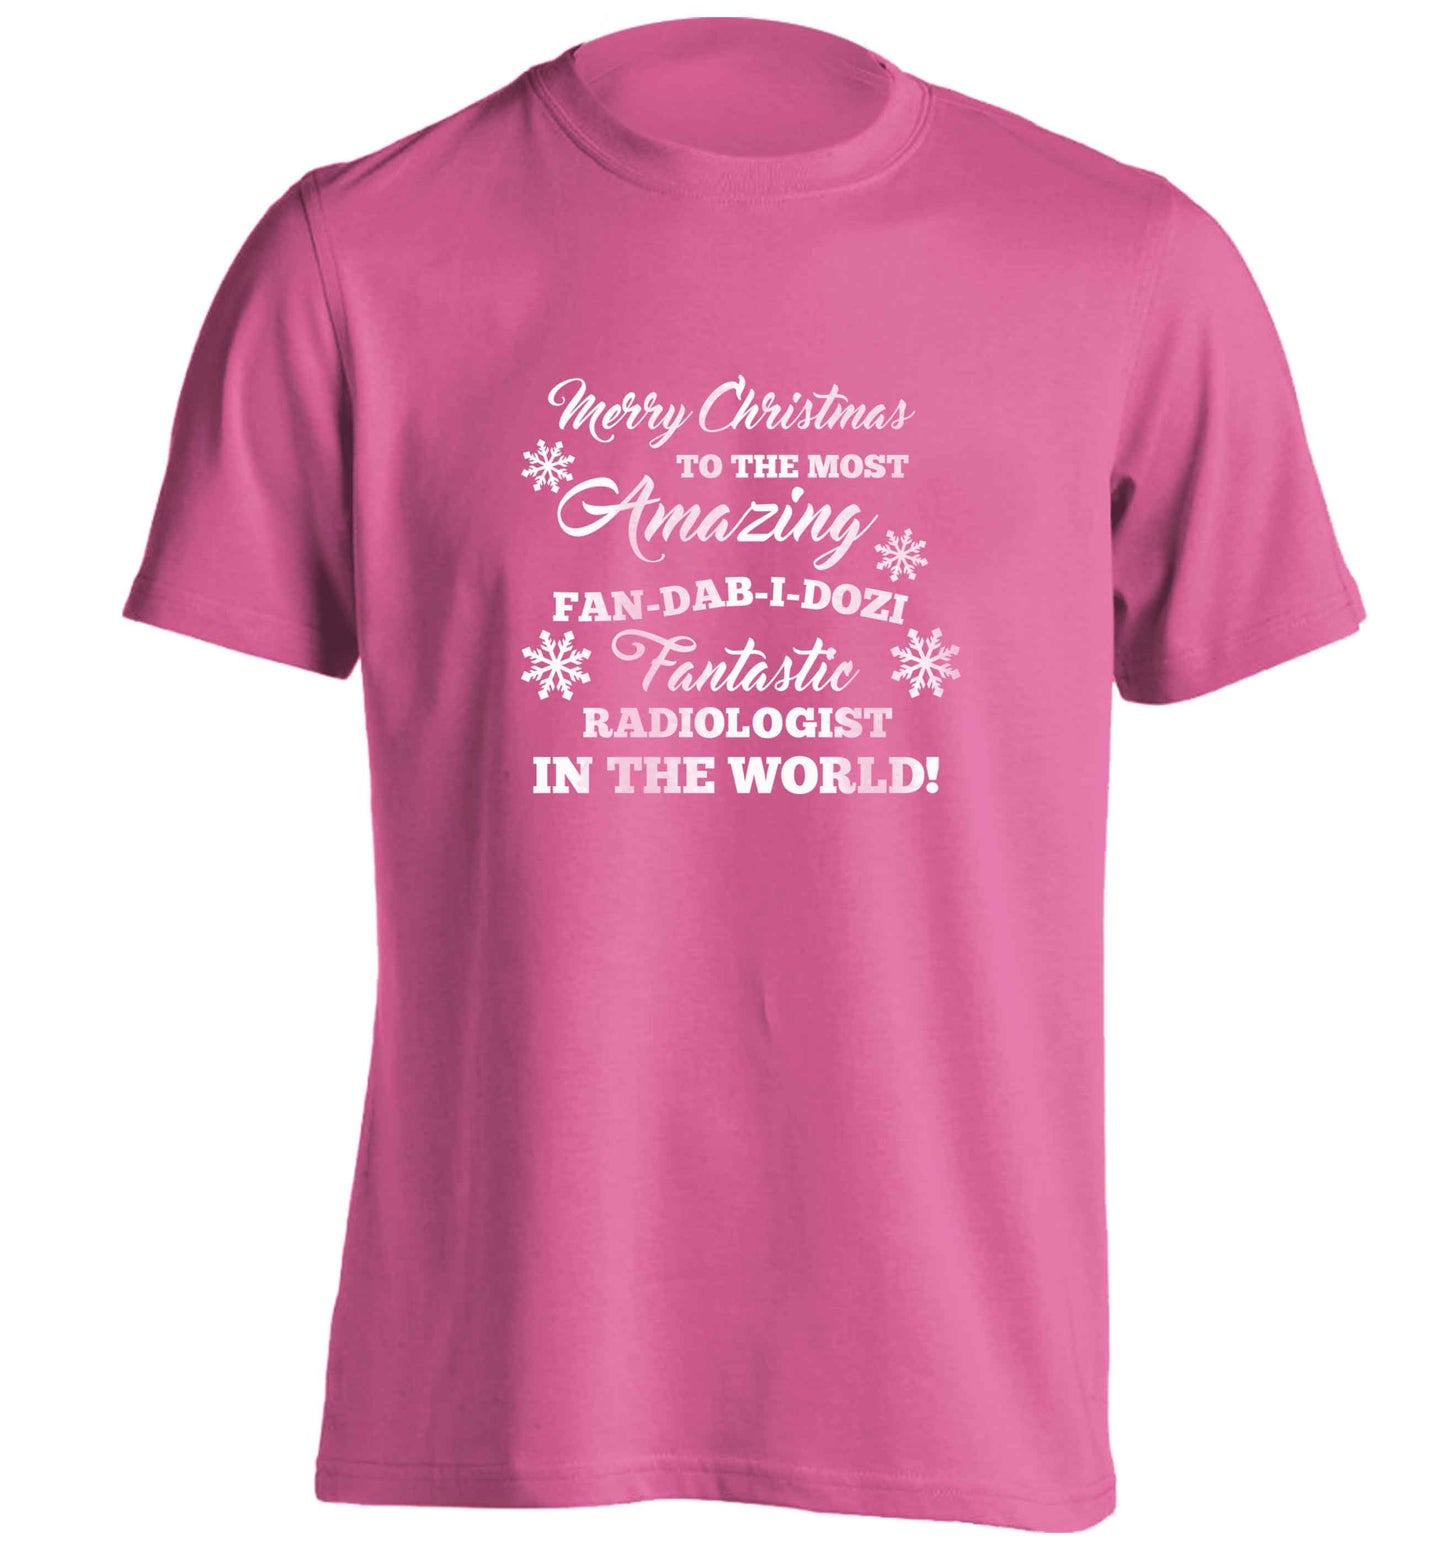 Merry Christmas to the most amazing radiologist in the world! adults unisex pink Tshirt 2XL